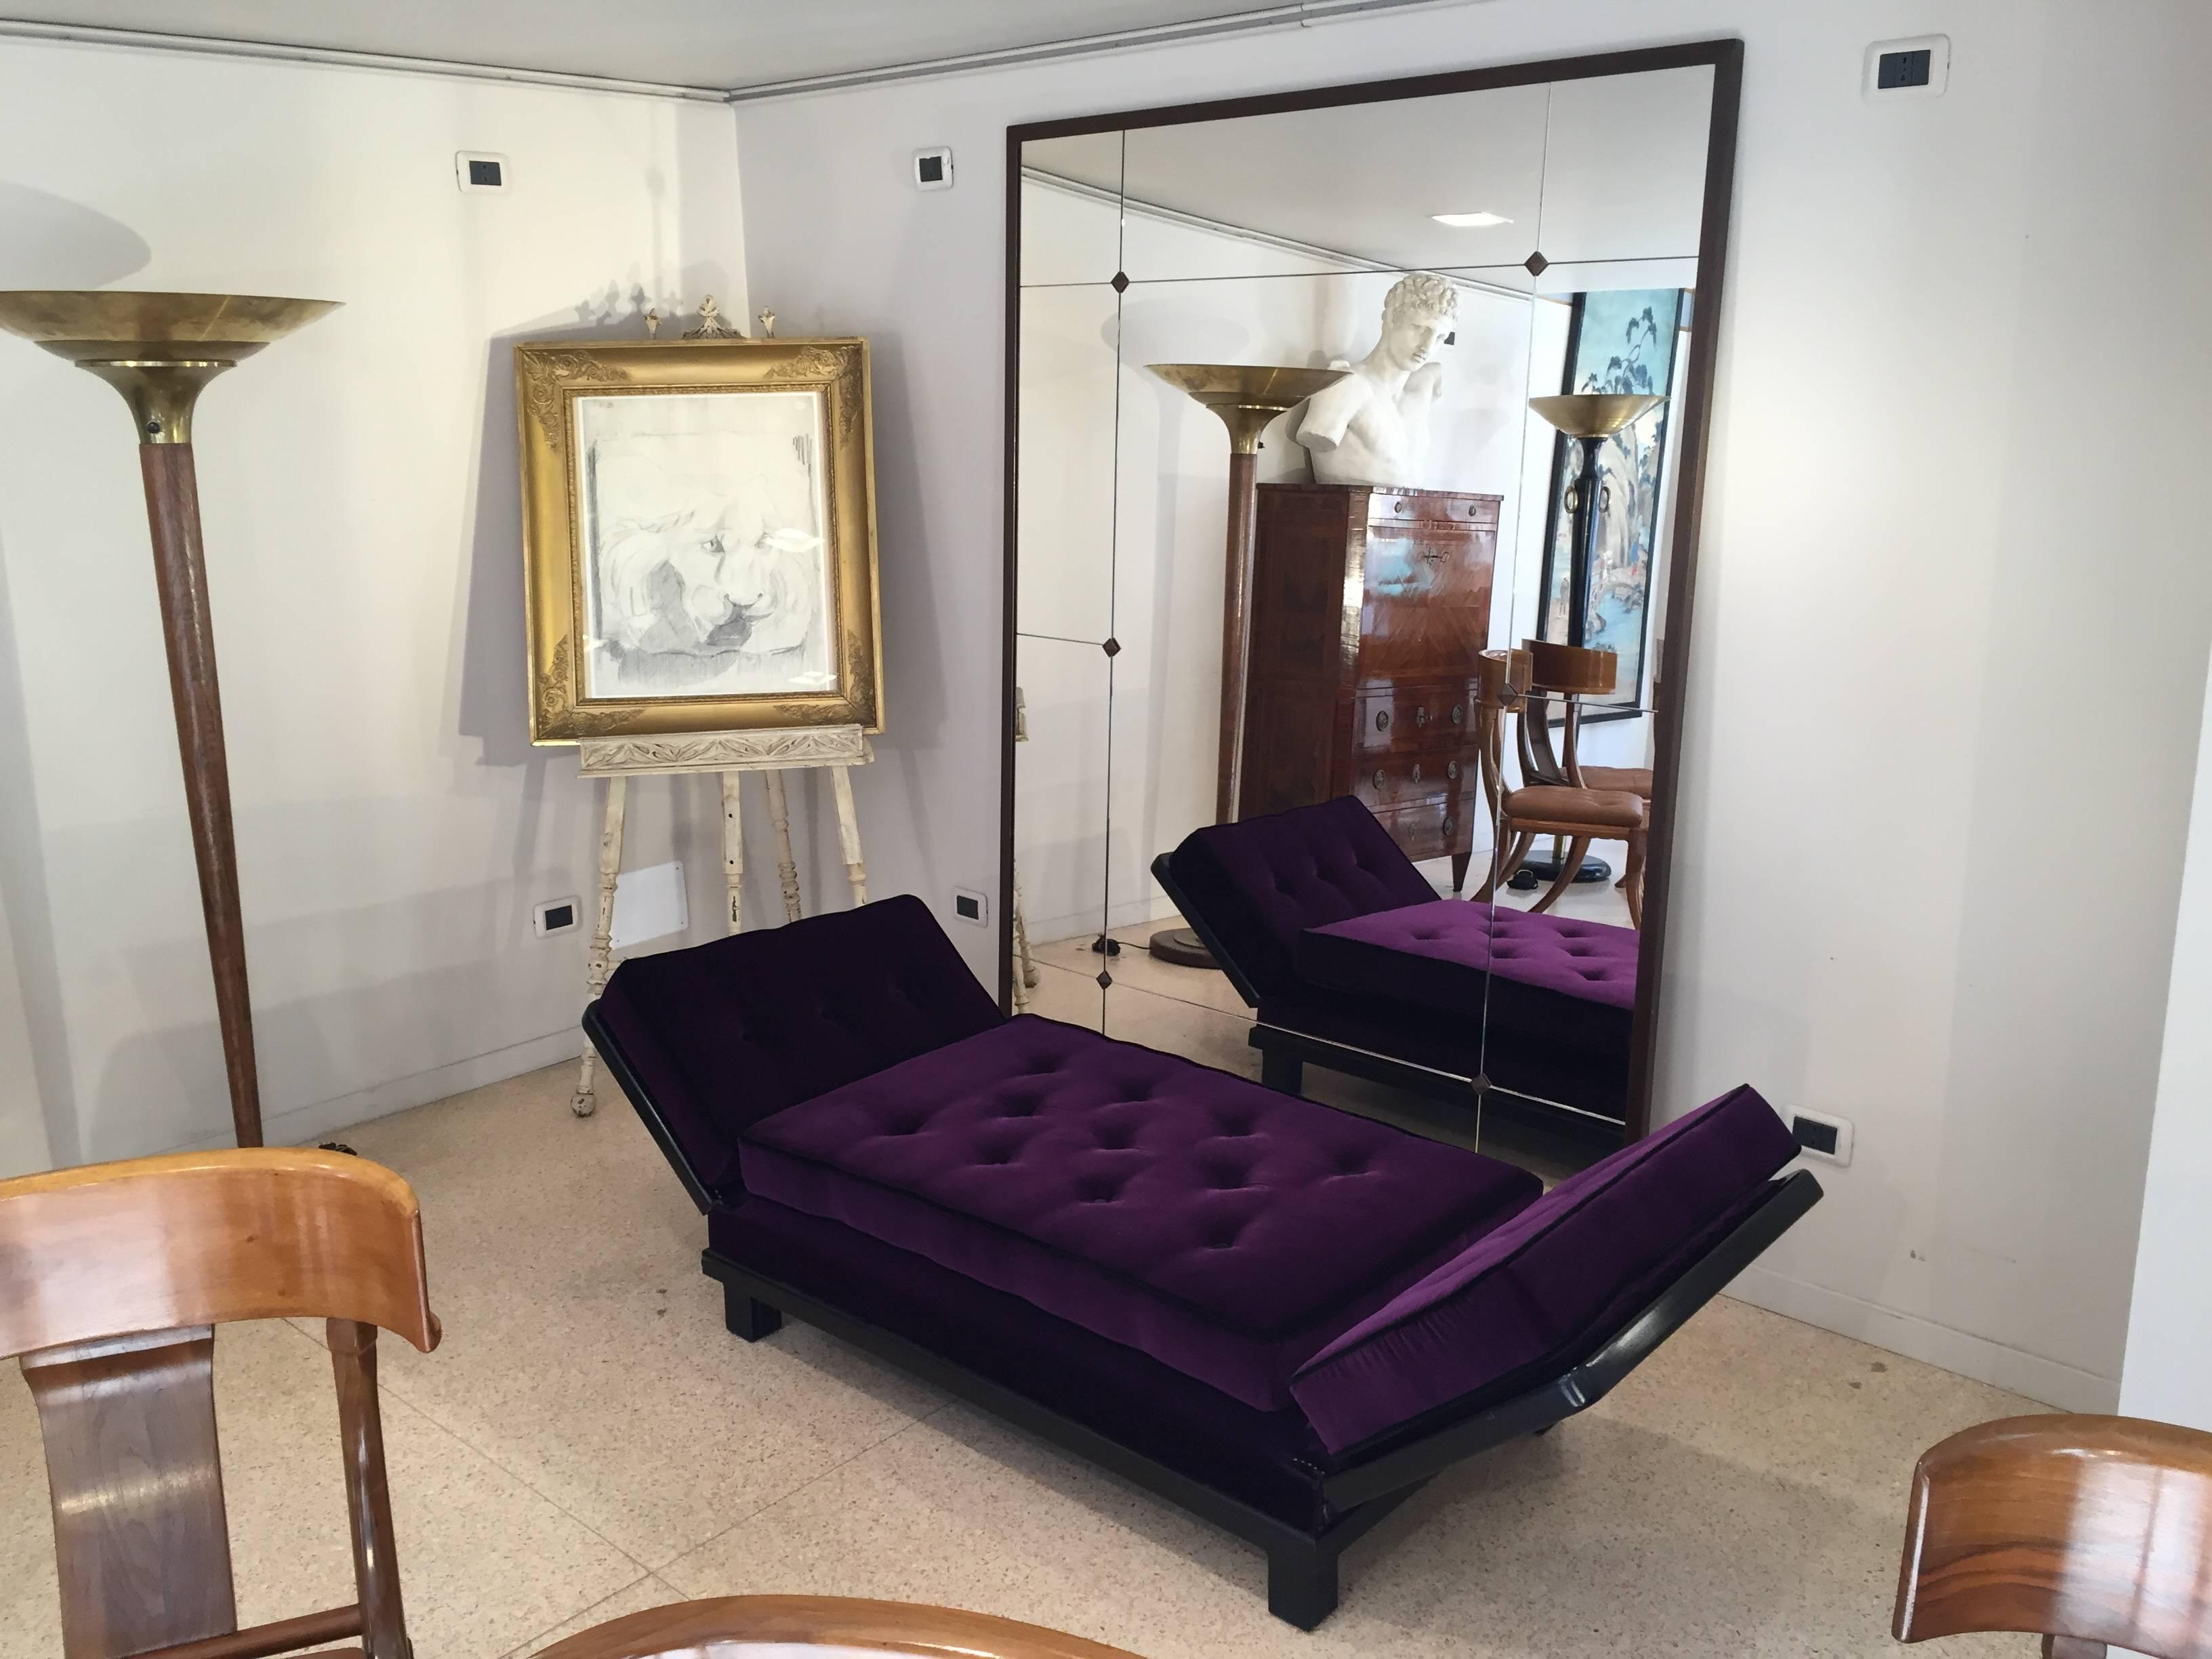 A charming velvet purple Art Deco daybed. Five figures possible.
This dormouse comes from France, the wood structure in fluted on the legs and it is ebonized. We have restored the wood structure in a conservative way and we have re upholstered the